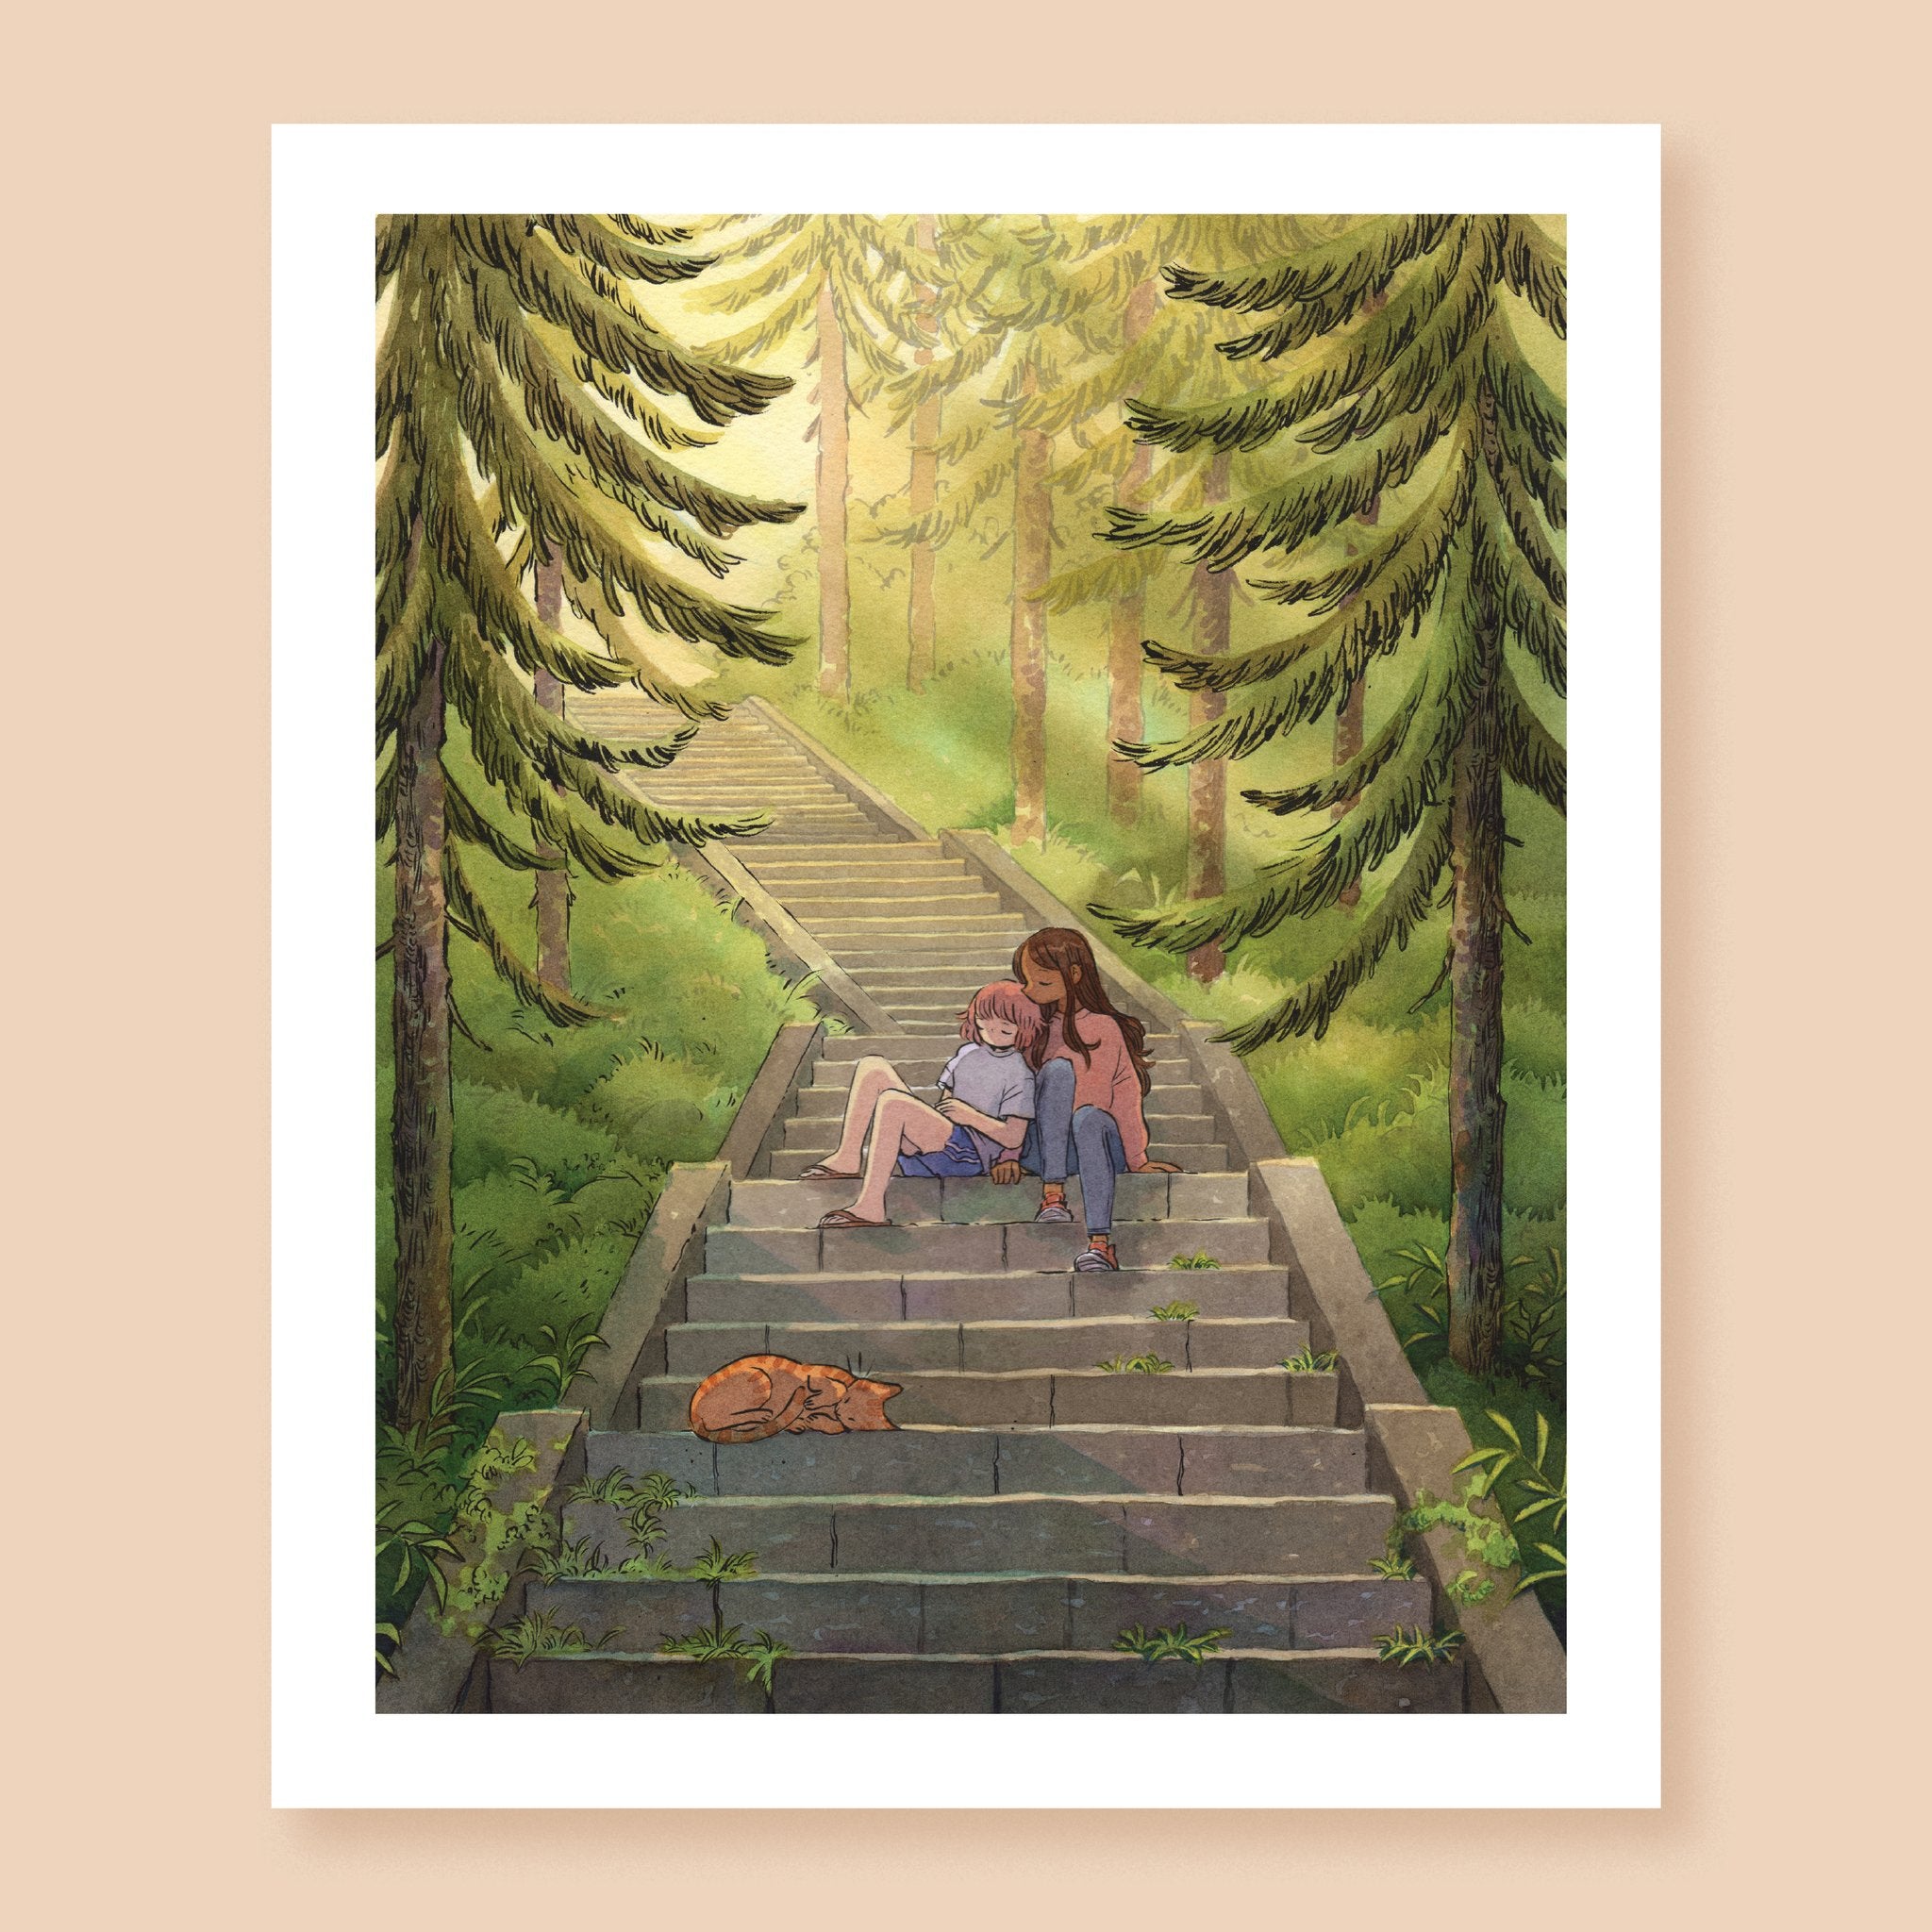 Print of a colored ink artwork depicting two characters sitting and leaning onto each other on stone stairs leading up a forested mountain, surrounded by pines. There is an orange tabby cat asleep some steps below them, and warm sunlight streams from uphill.